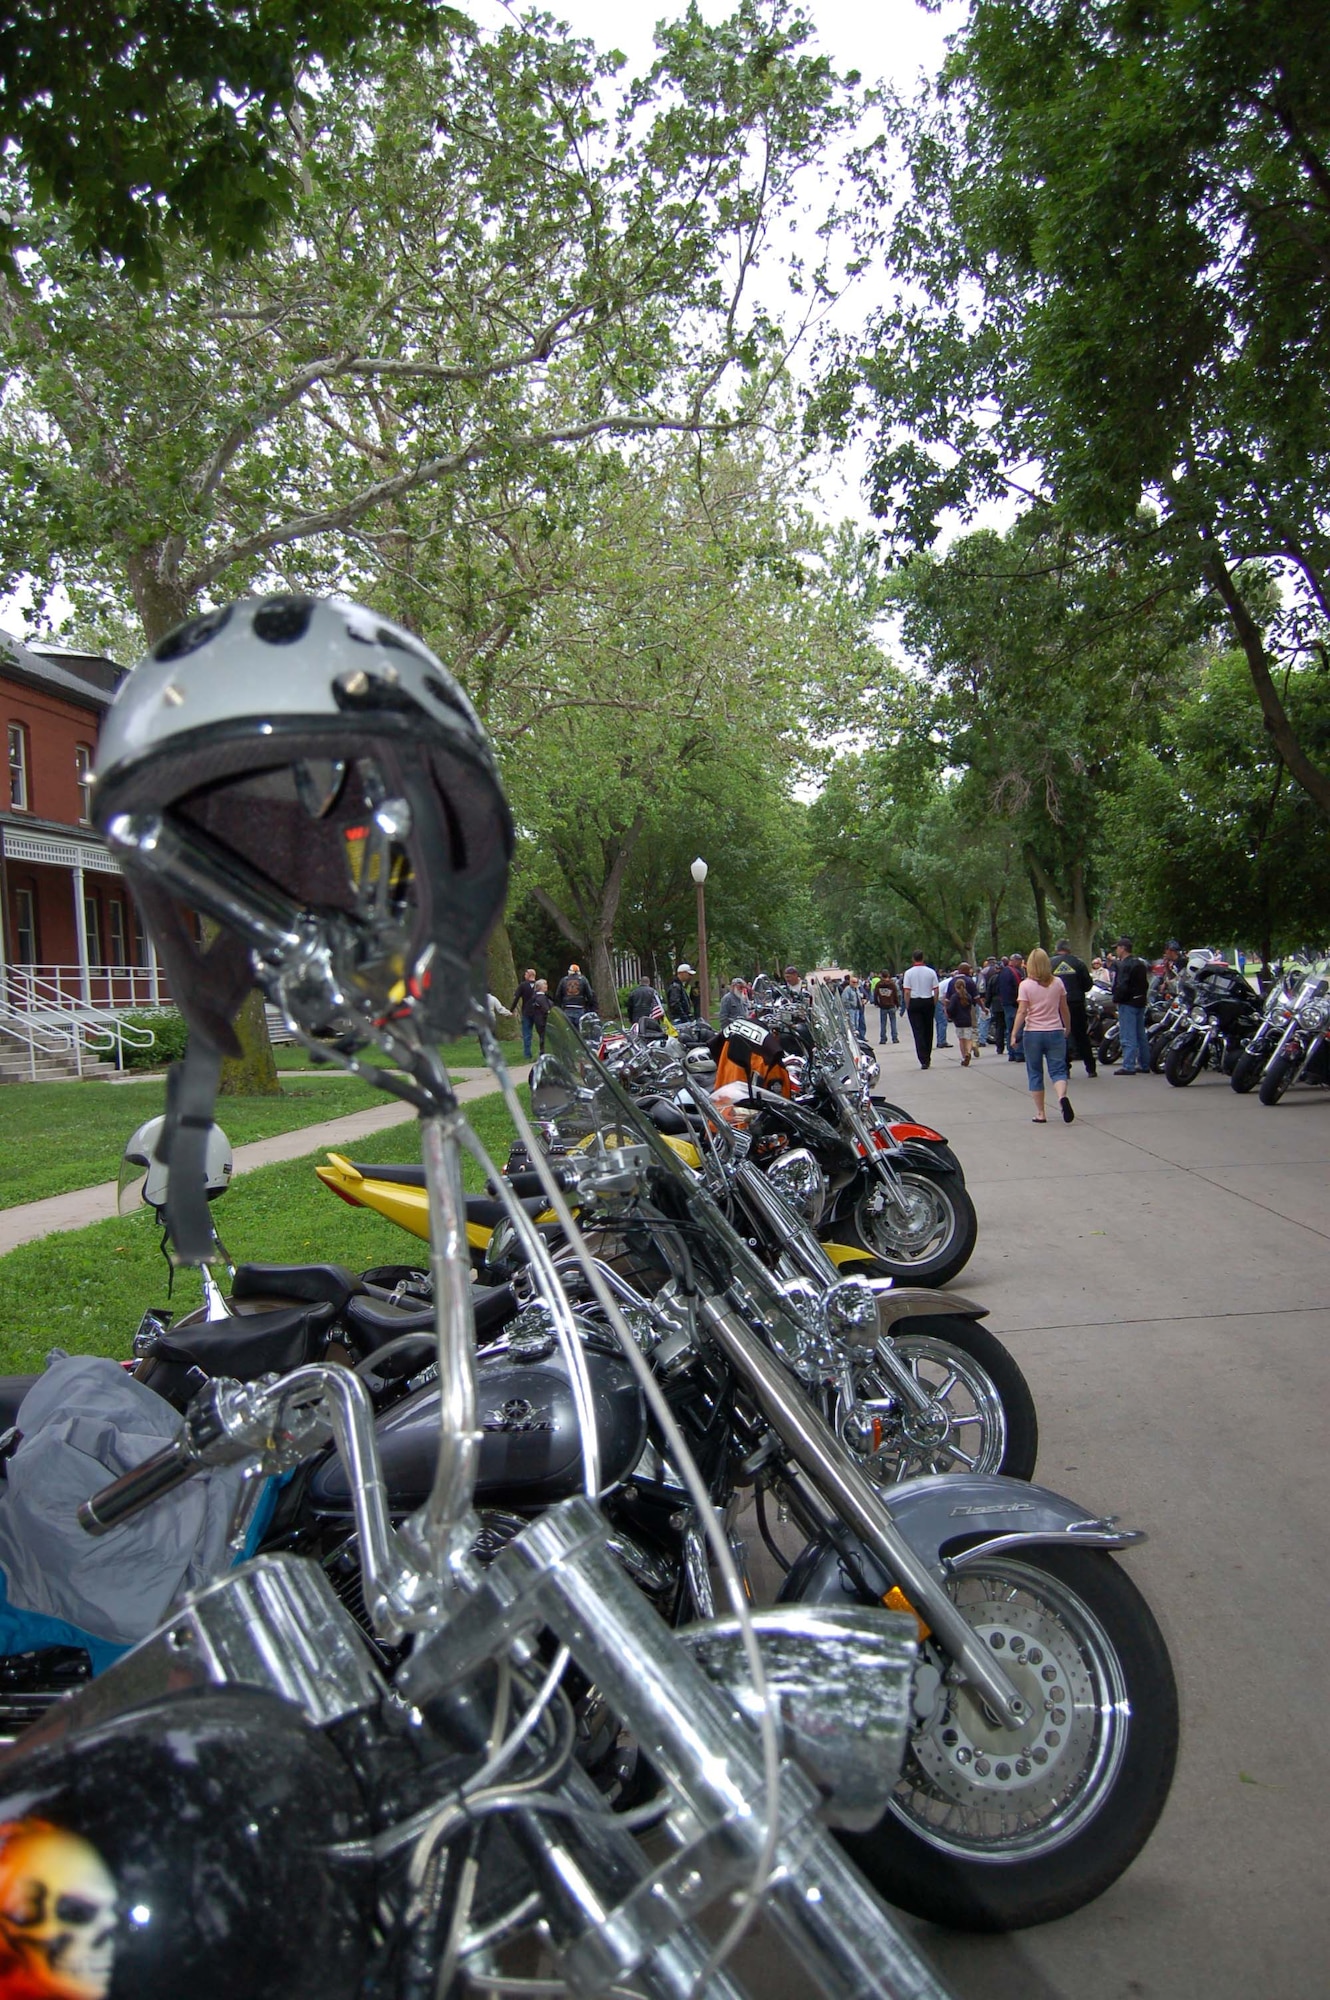 About 200 motorcycles line Offutt’s parade grounds Sunday during the Yellow Ribbon Run. The annual motorcycle rally supports military men and women in the area through the Friends of the Family Support Center. (U.S. Air Force Photo By/Airman 1st Class Danielle Grannan) 